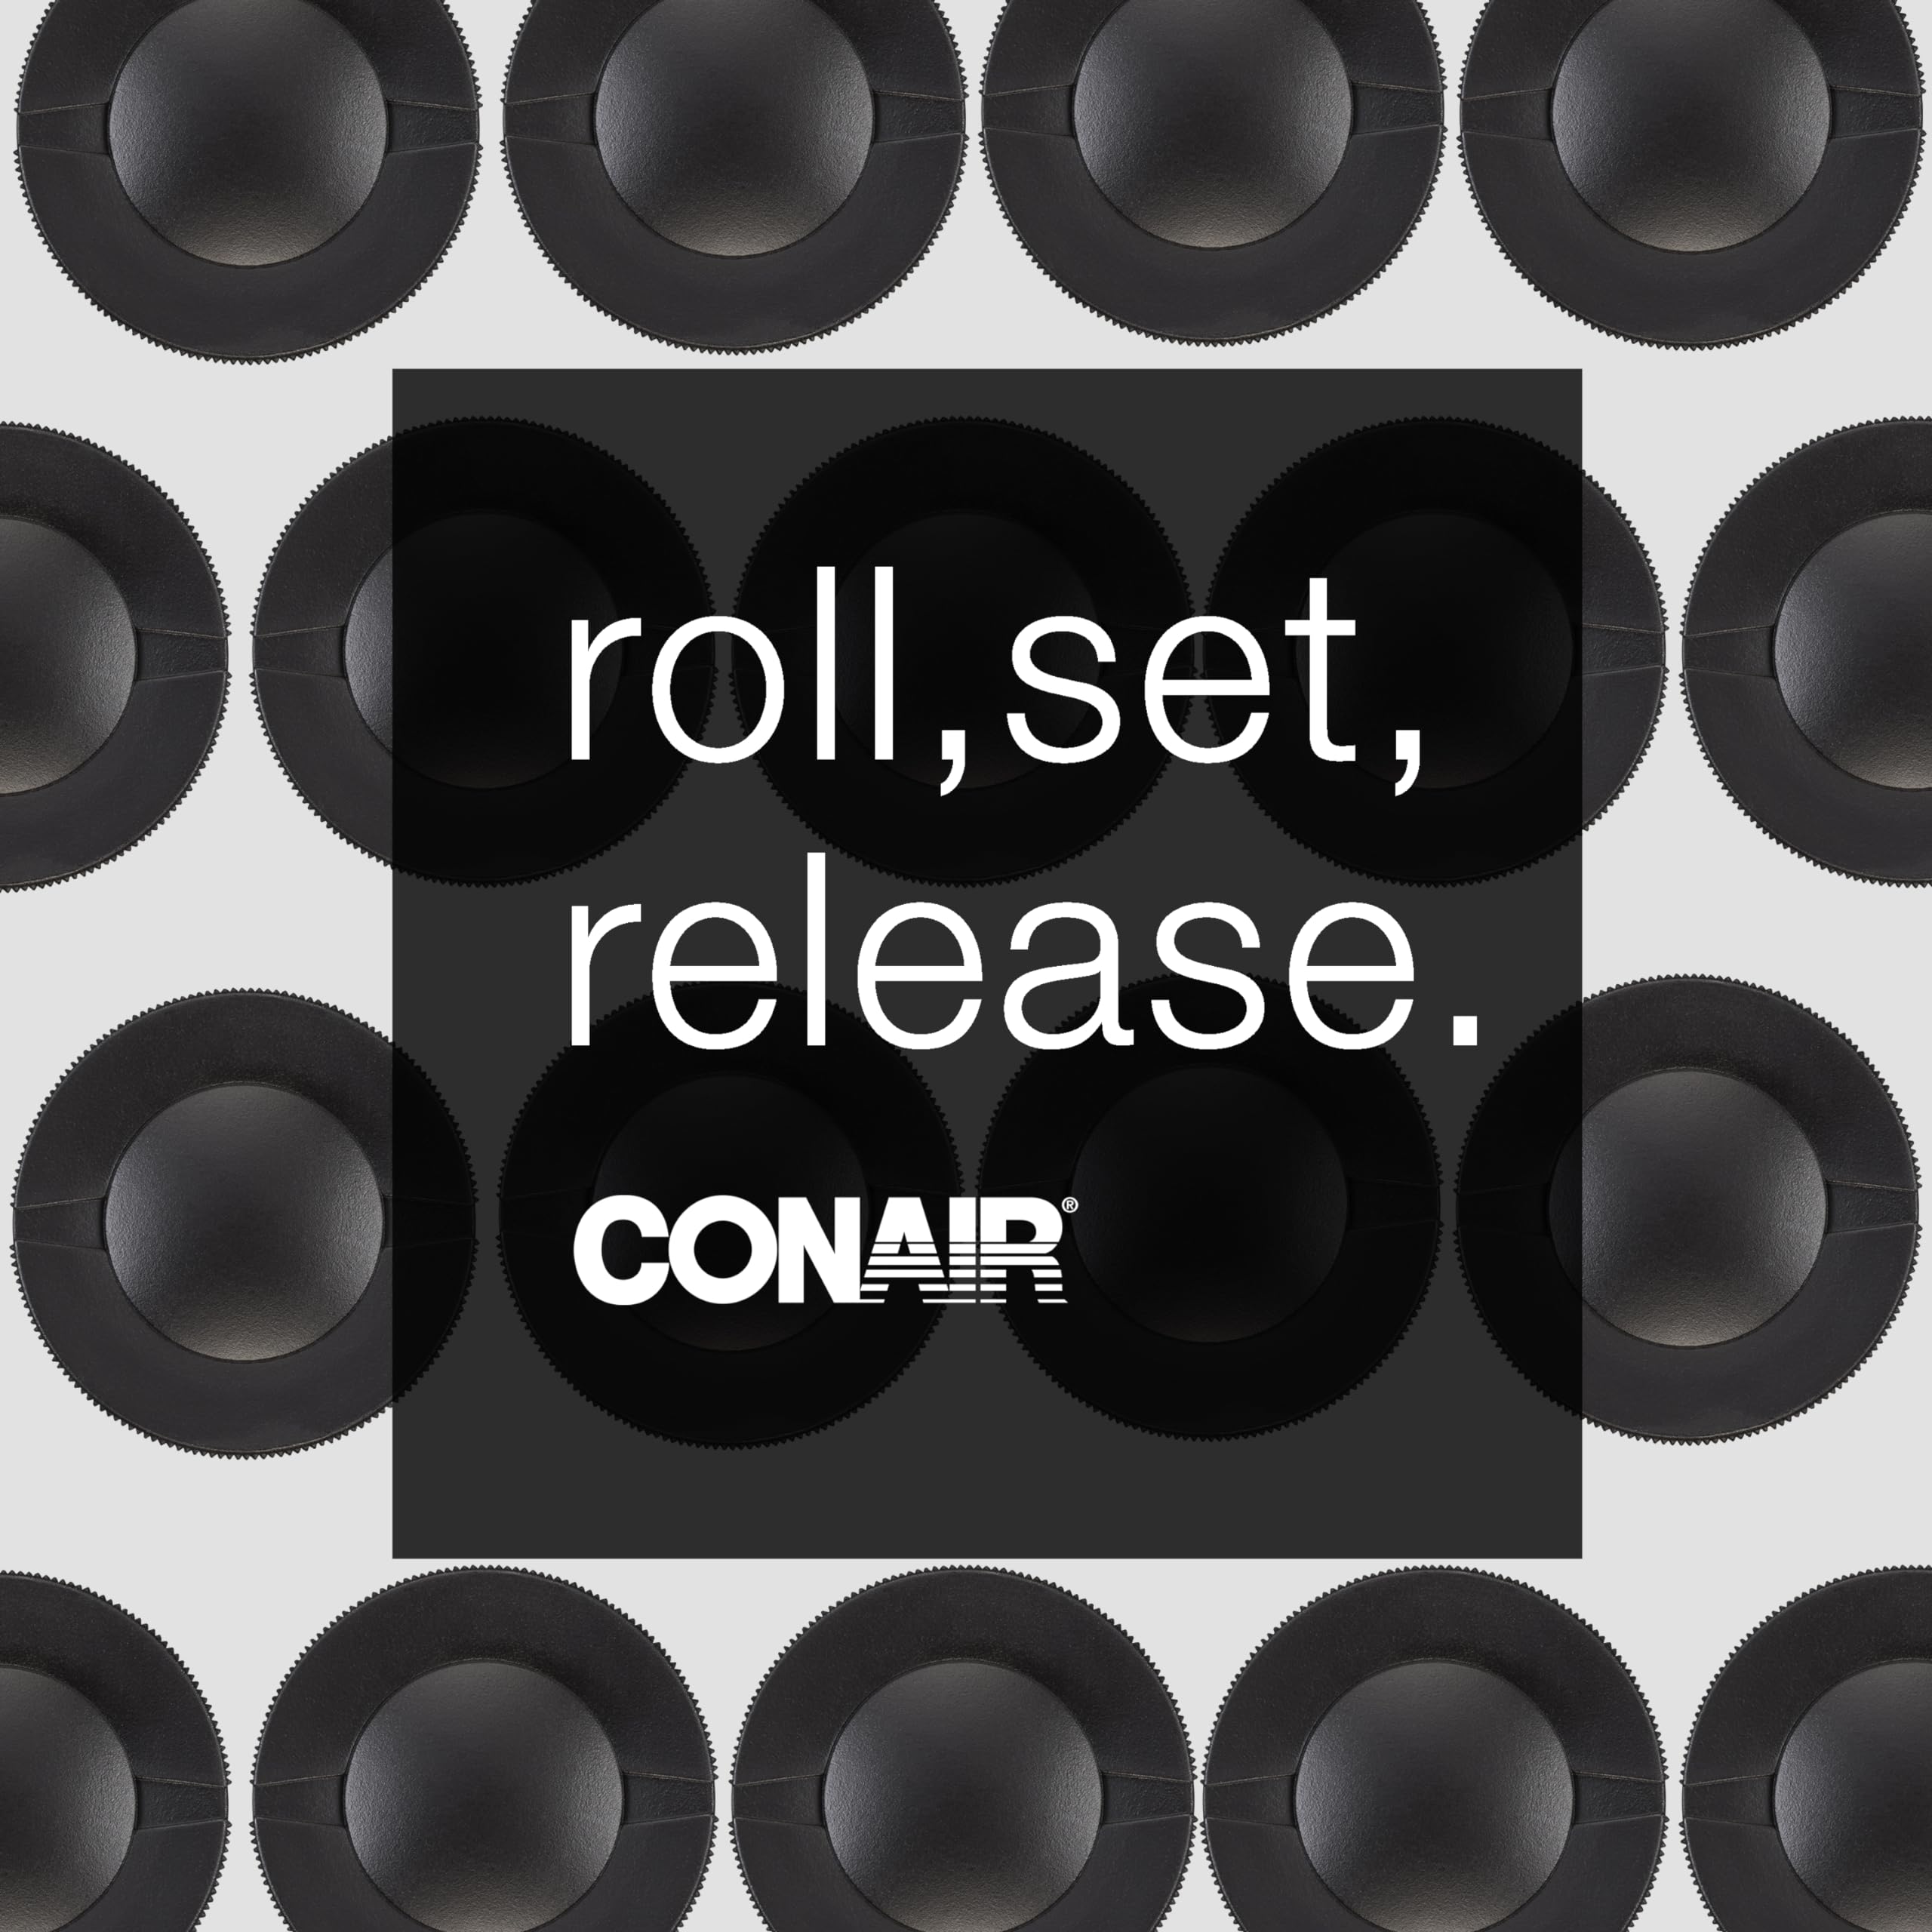 Conair Ceramic 1 1/2-inch Hot Rollers, Super Clips Included, Create Big Bouncy Curls, Black - Amazon Exclusive